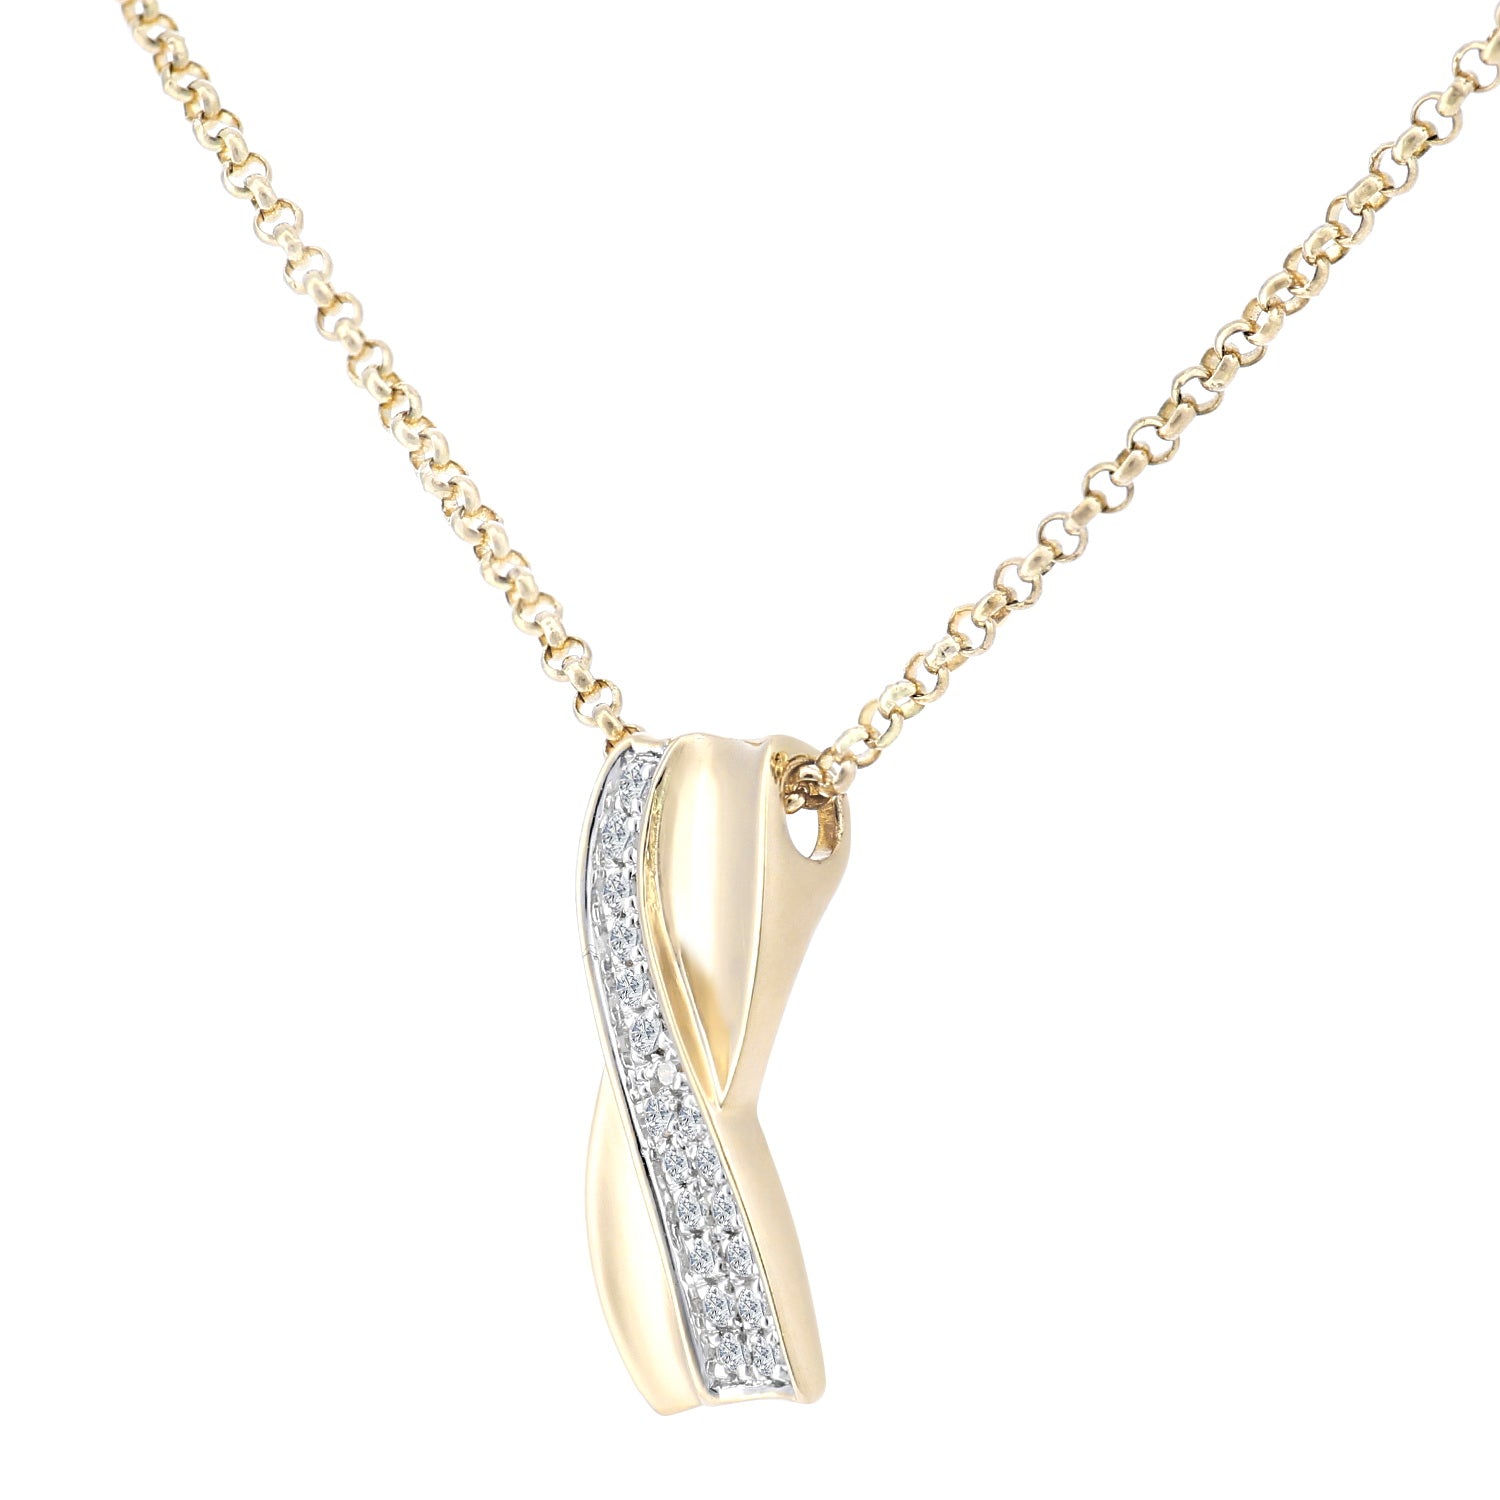 18ct Gold  Round 5pts Diamond Kiss Pendant Necklace 16 inch - DP1AXL624Y18